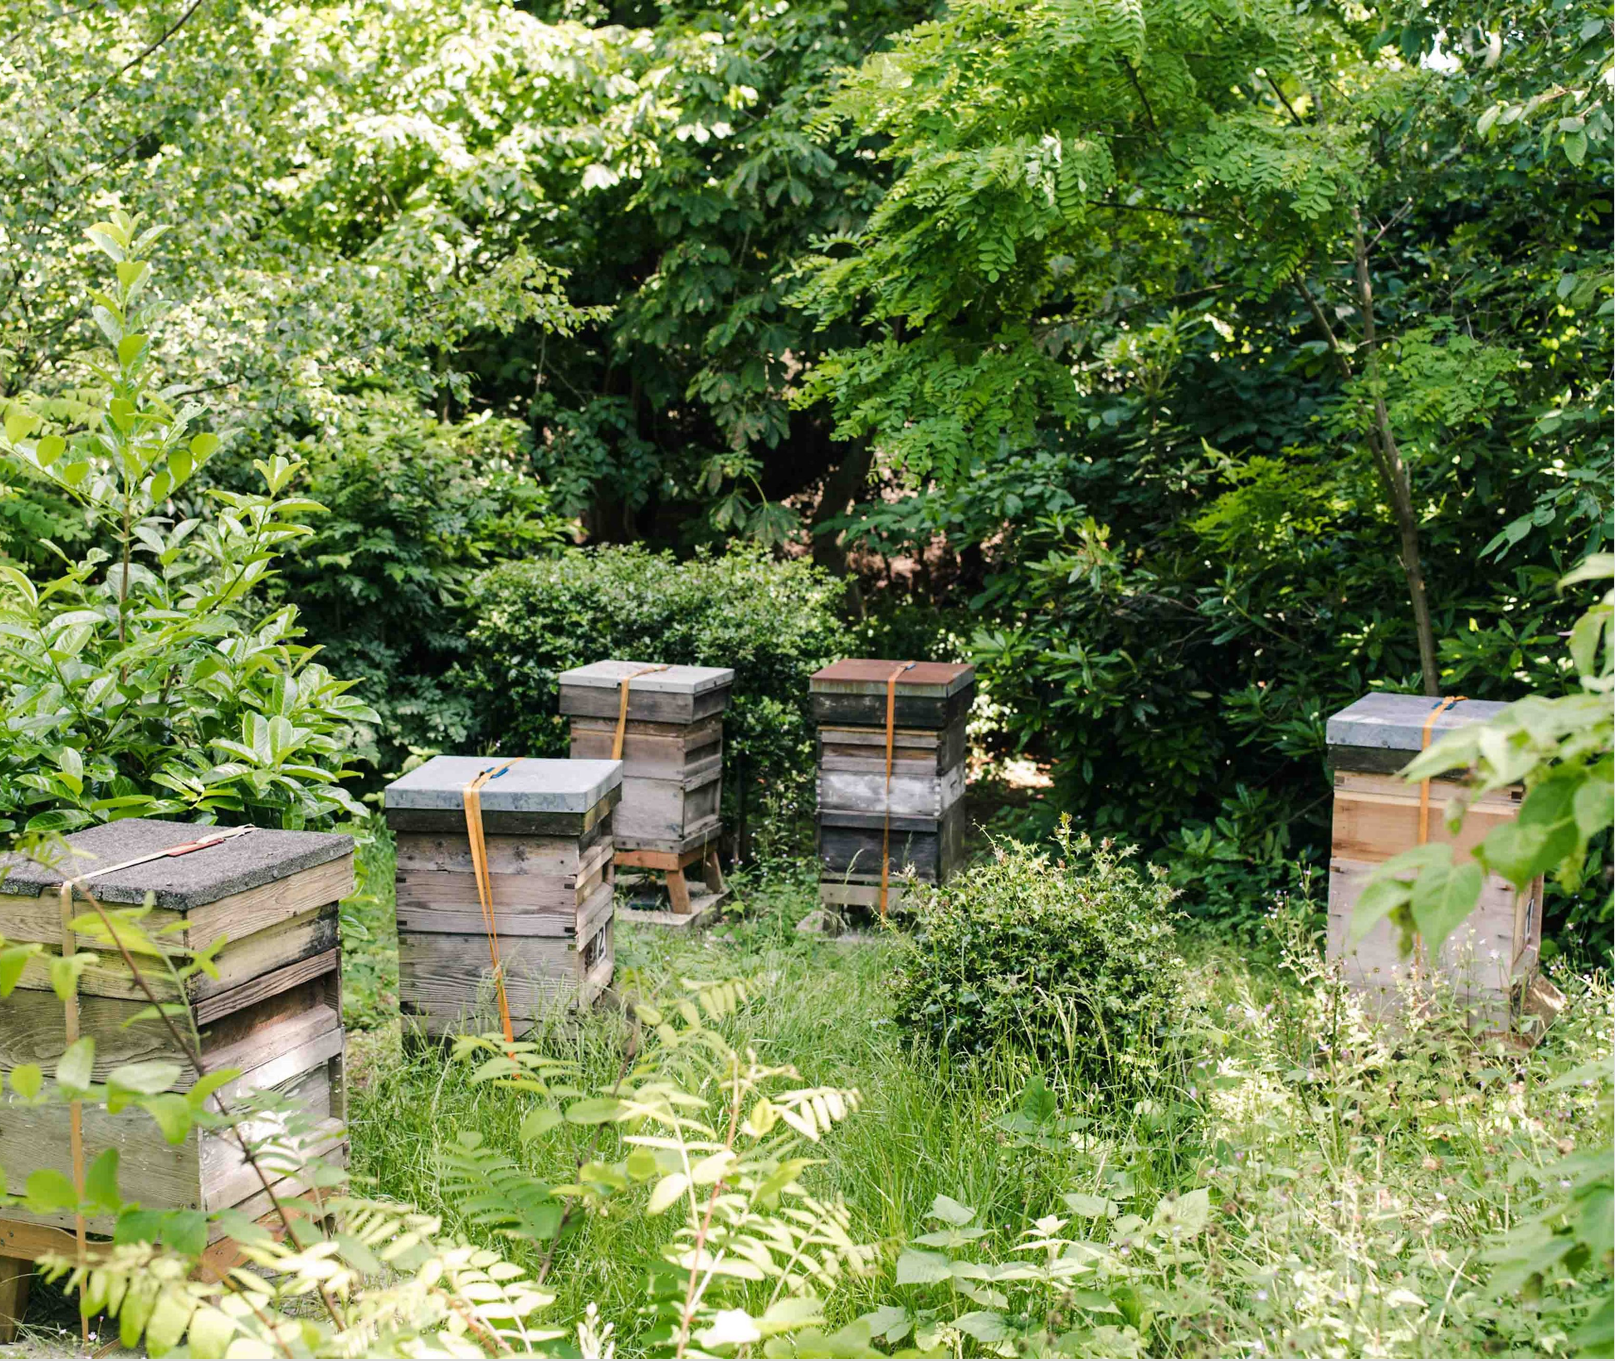 Bournemouth's beehives.